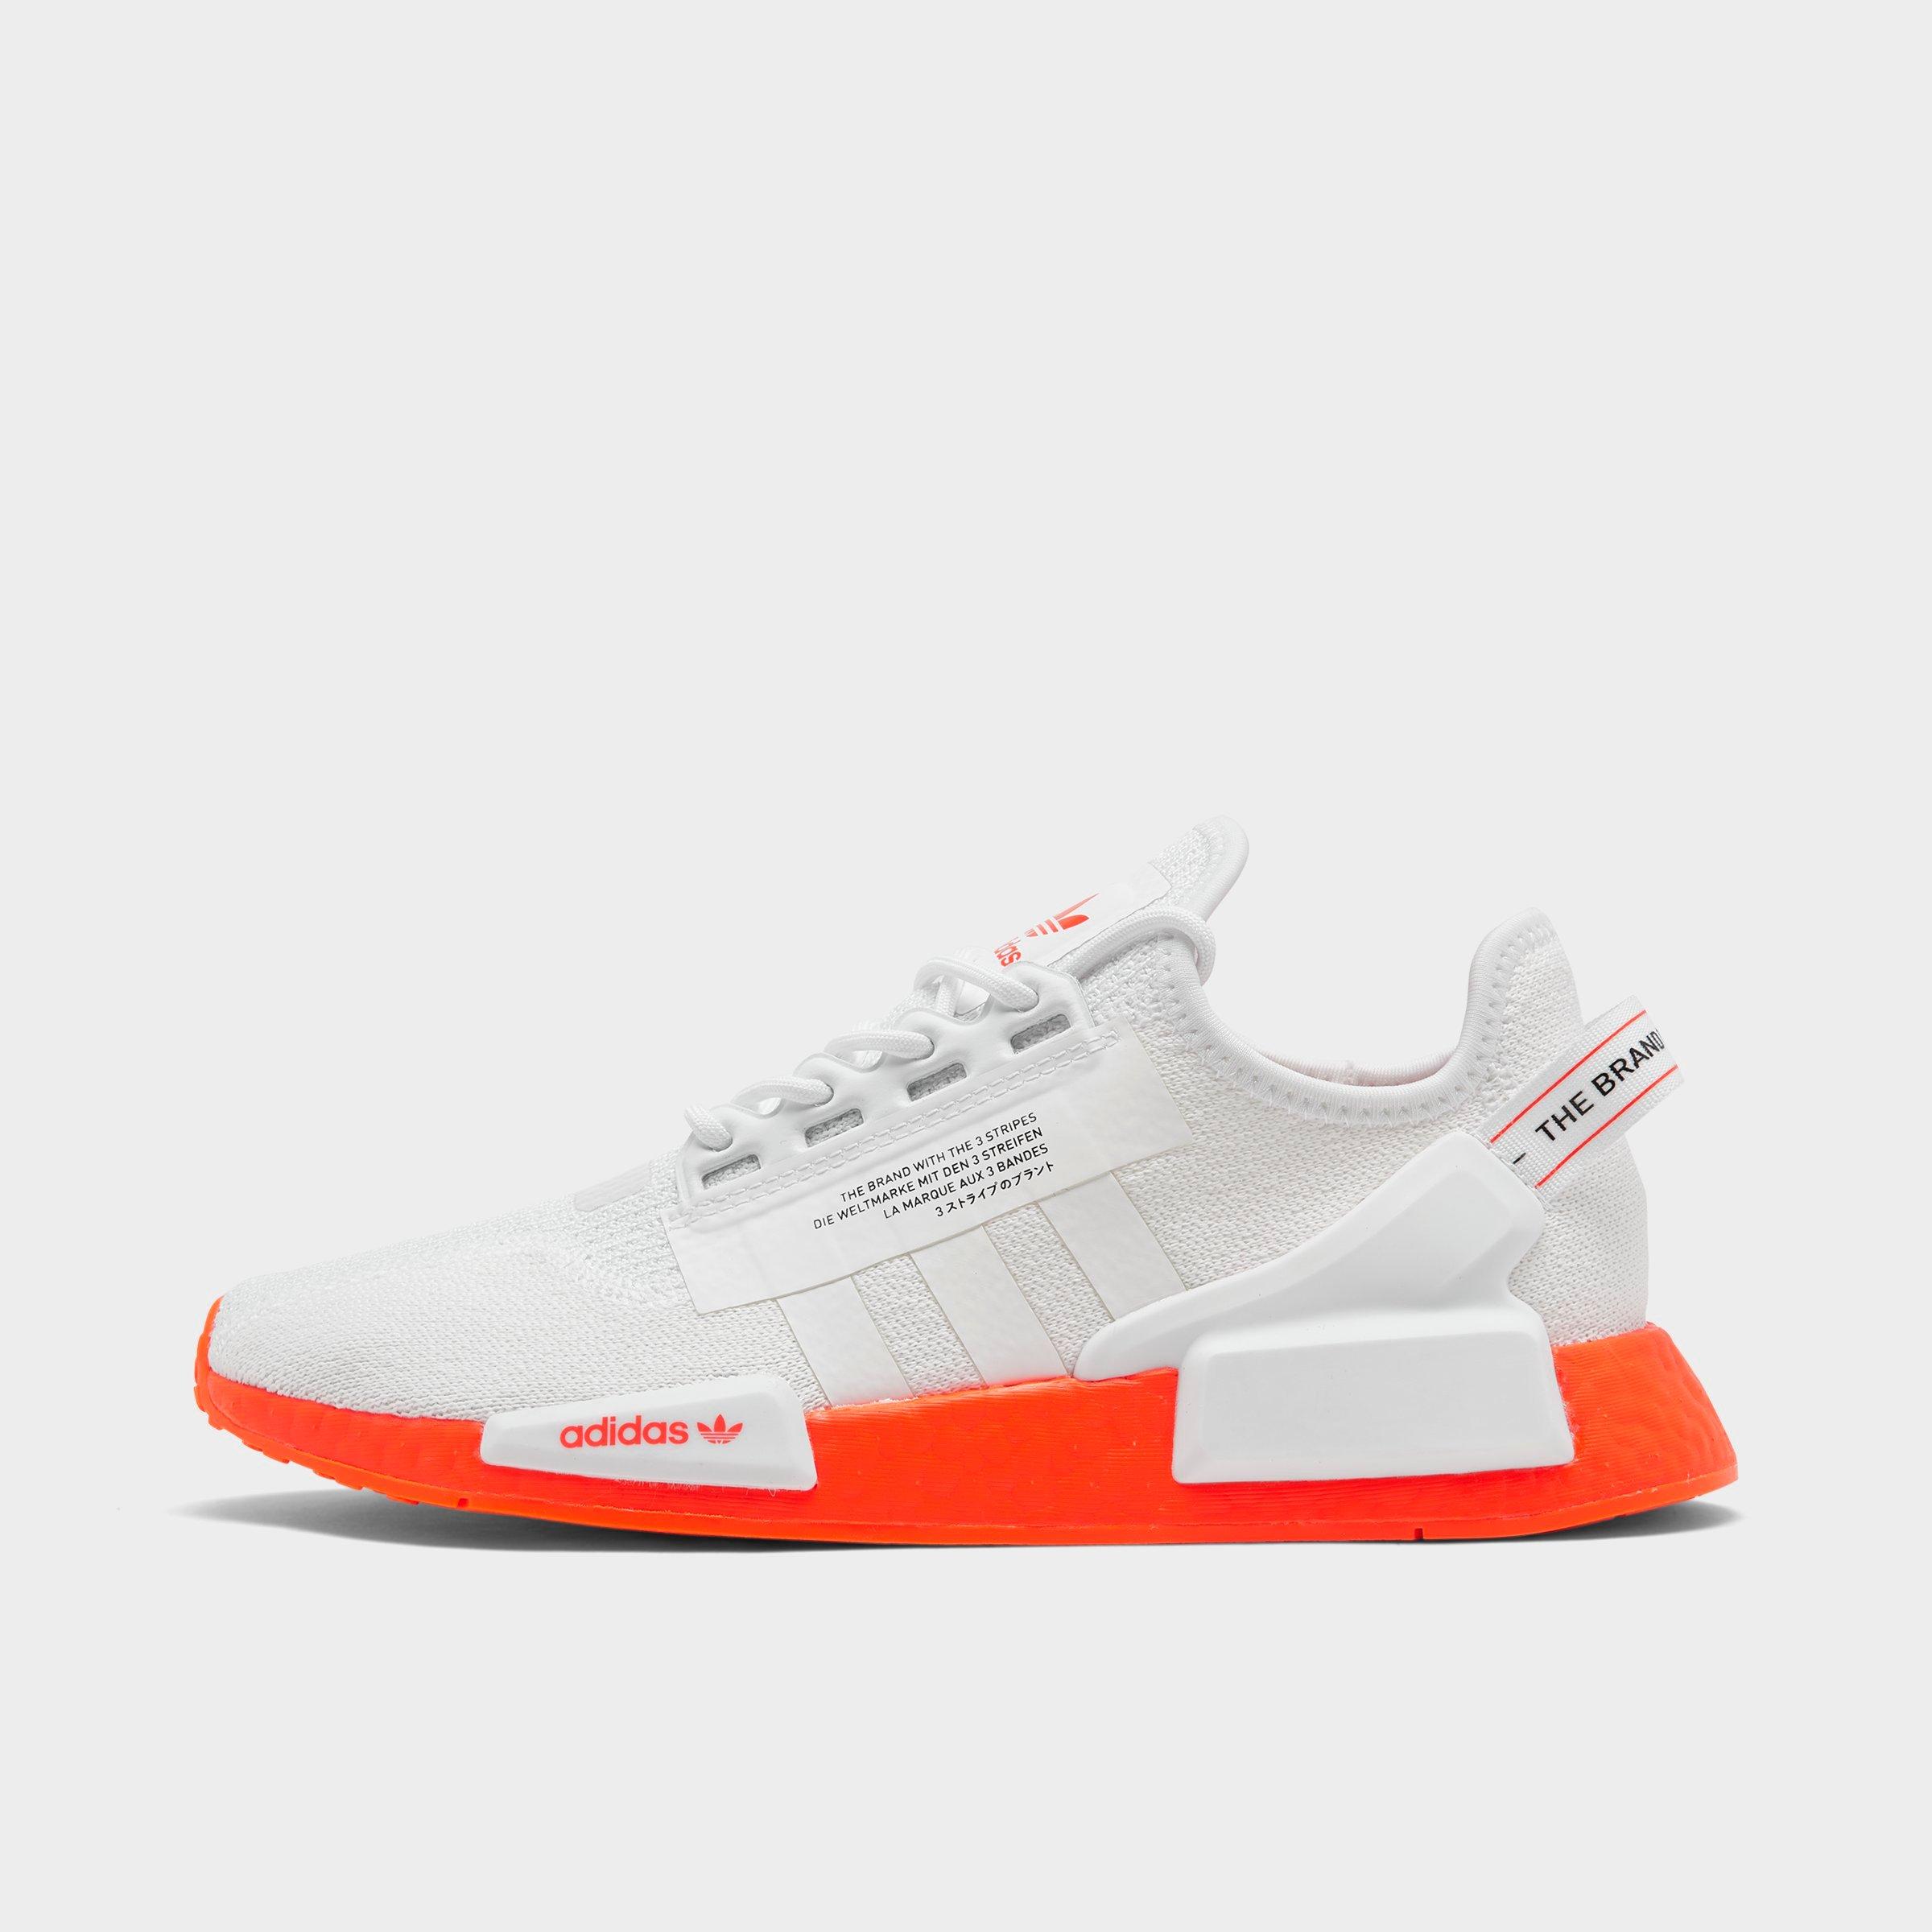 Adidas Originals Nmd R1 Ripstop in White for Men Bright